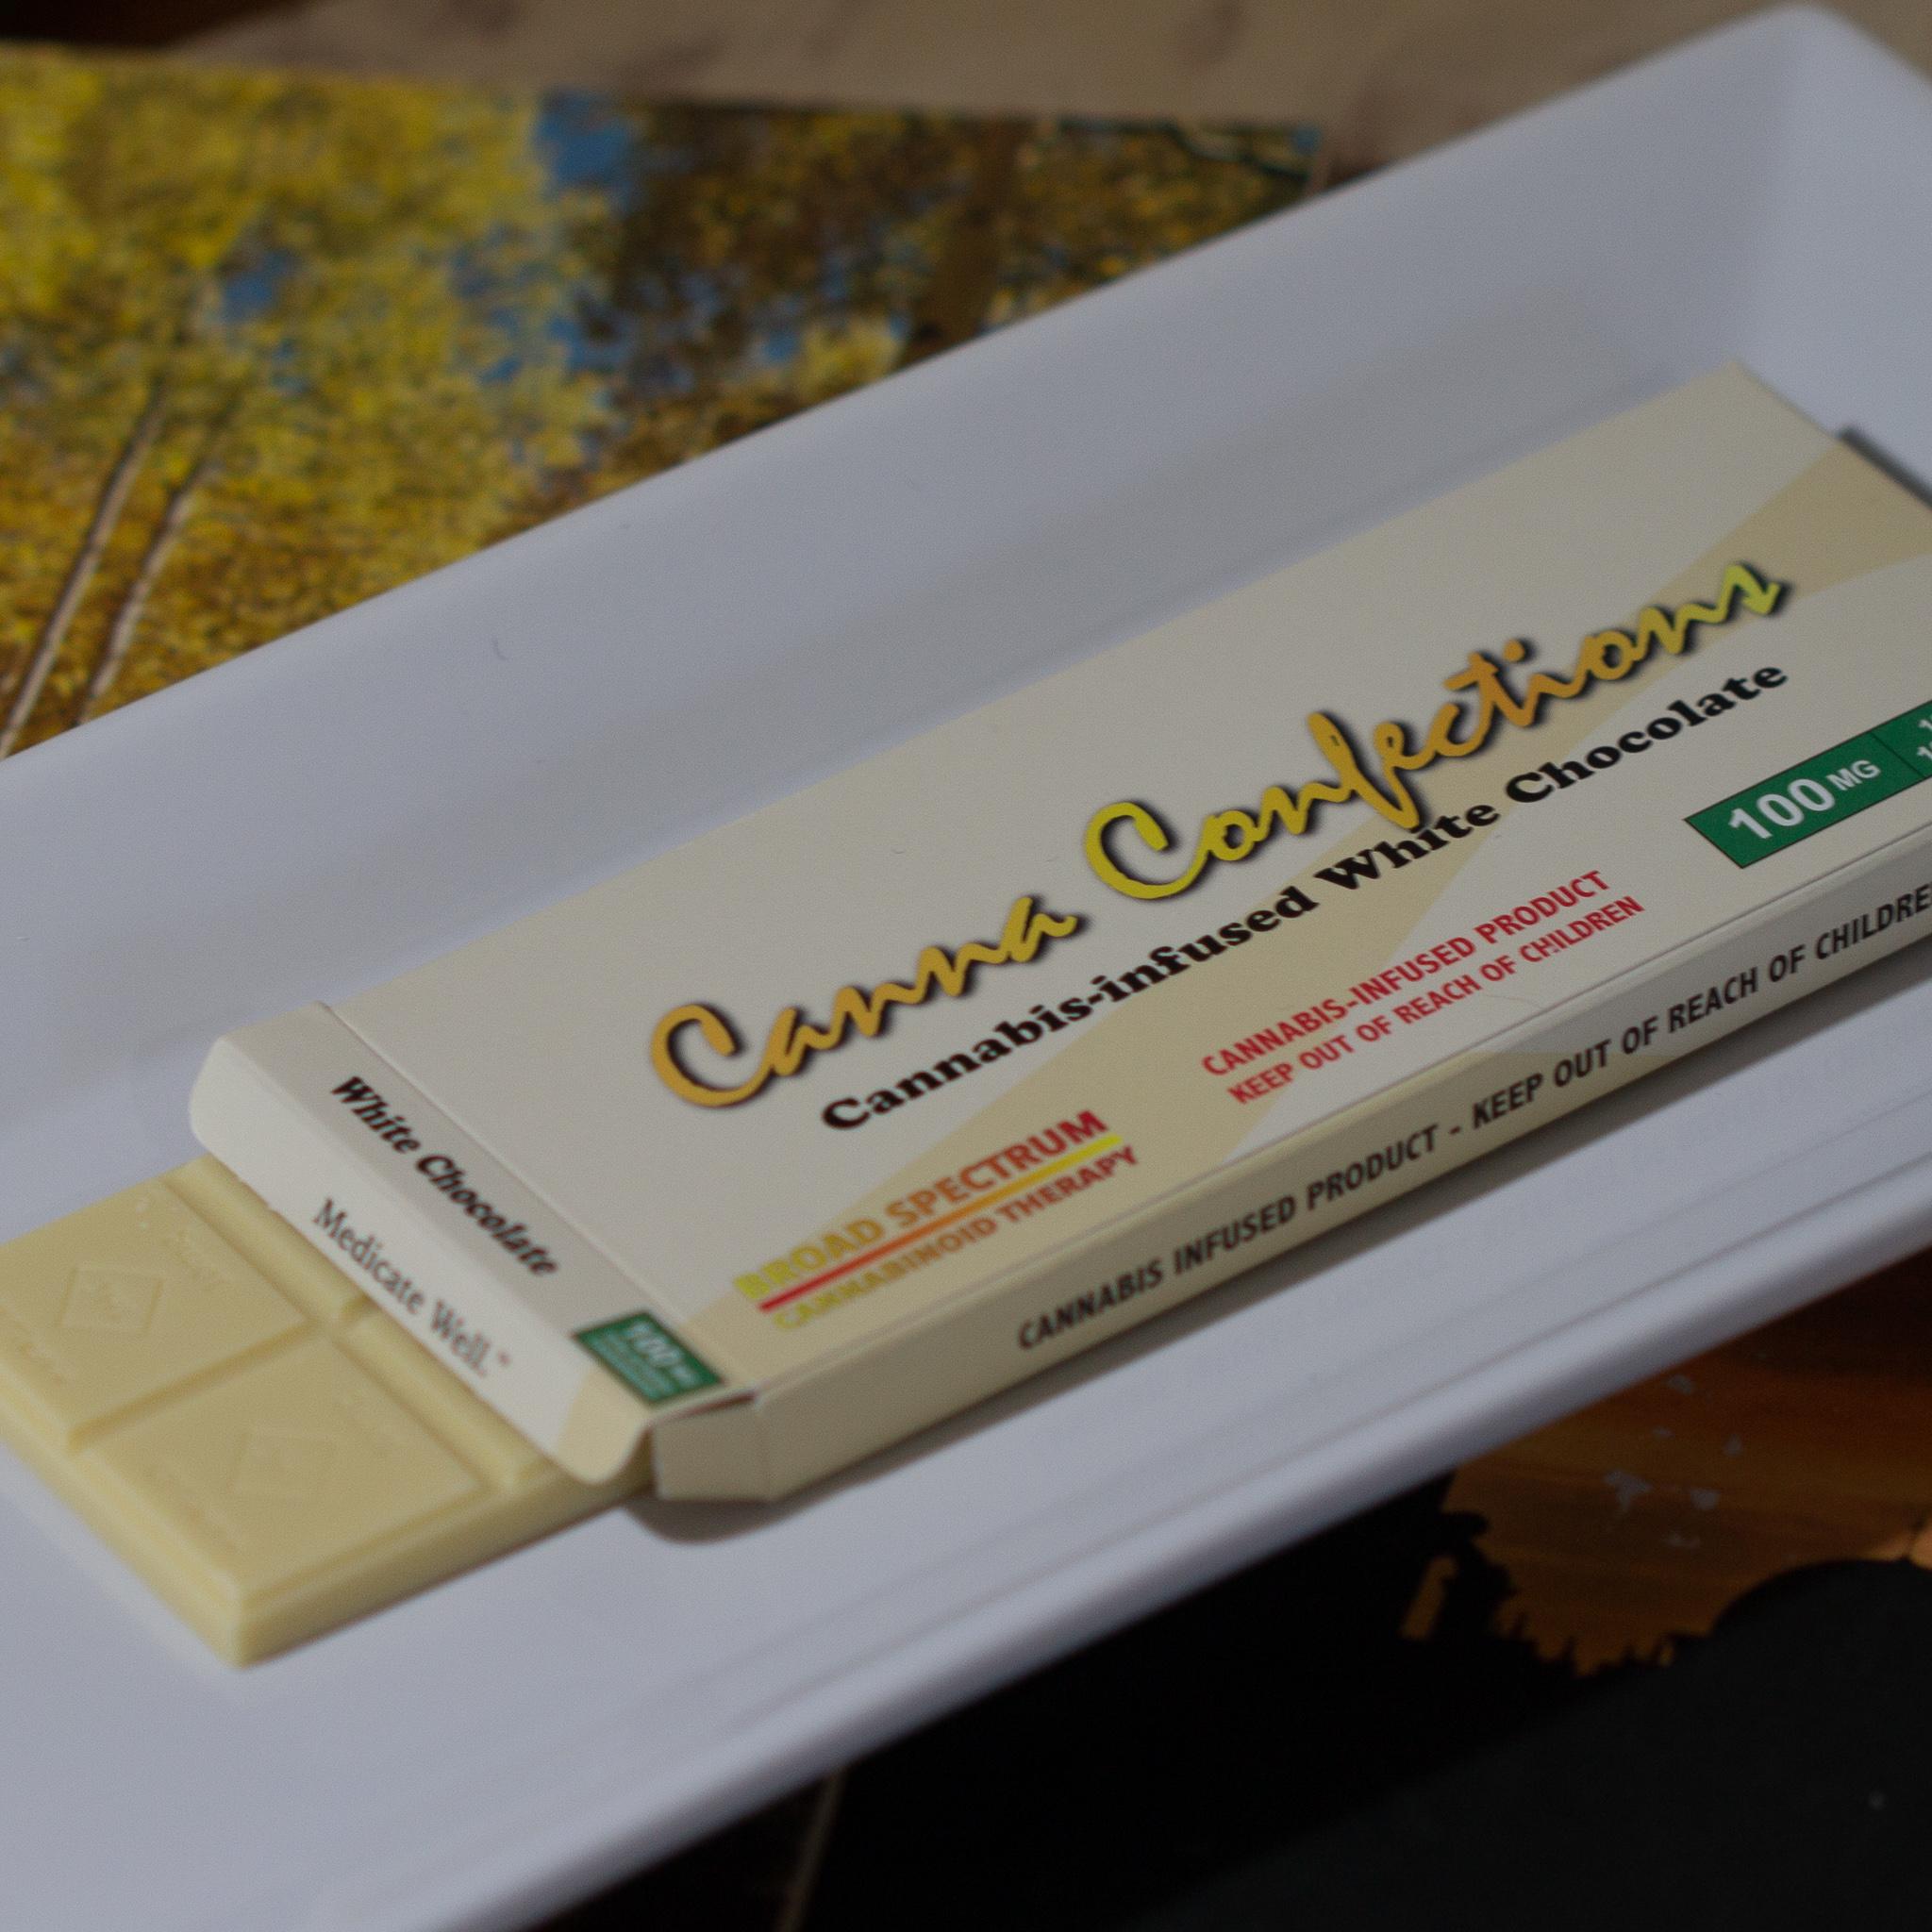 Canna_Confections-Infused_White_Chocolate_Bar-Belgian-100mg-Halo_Infusions